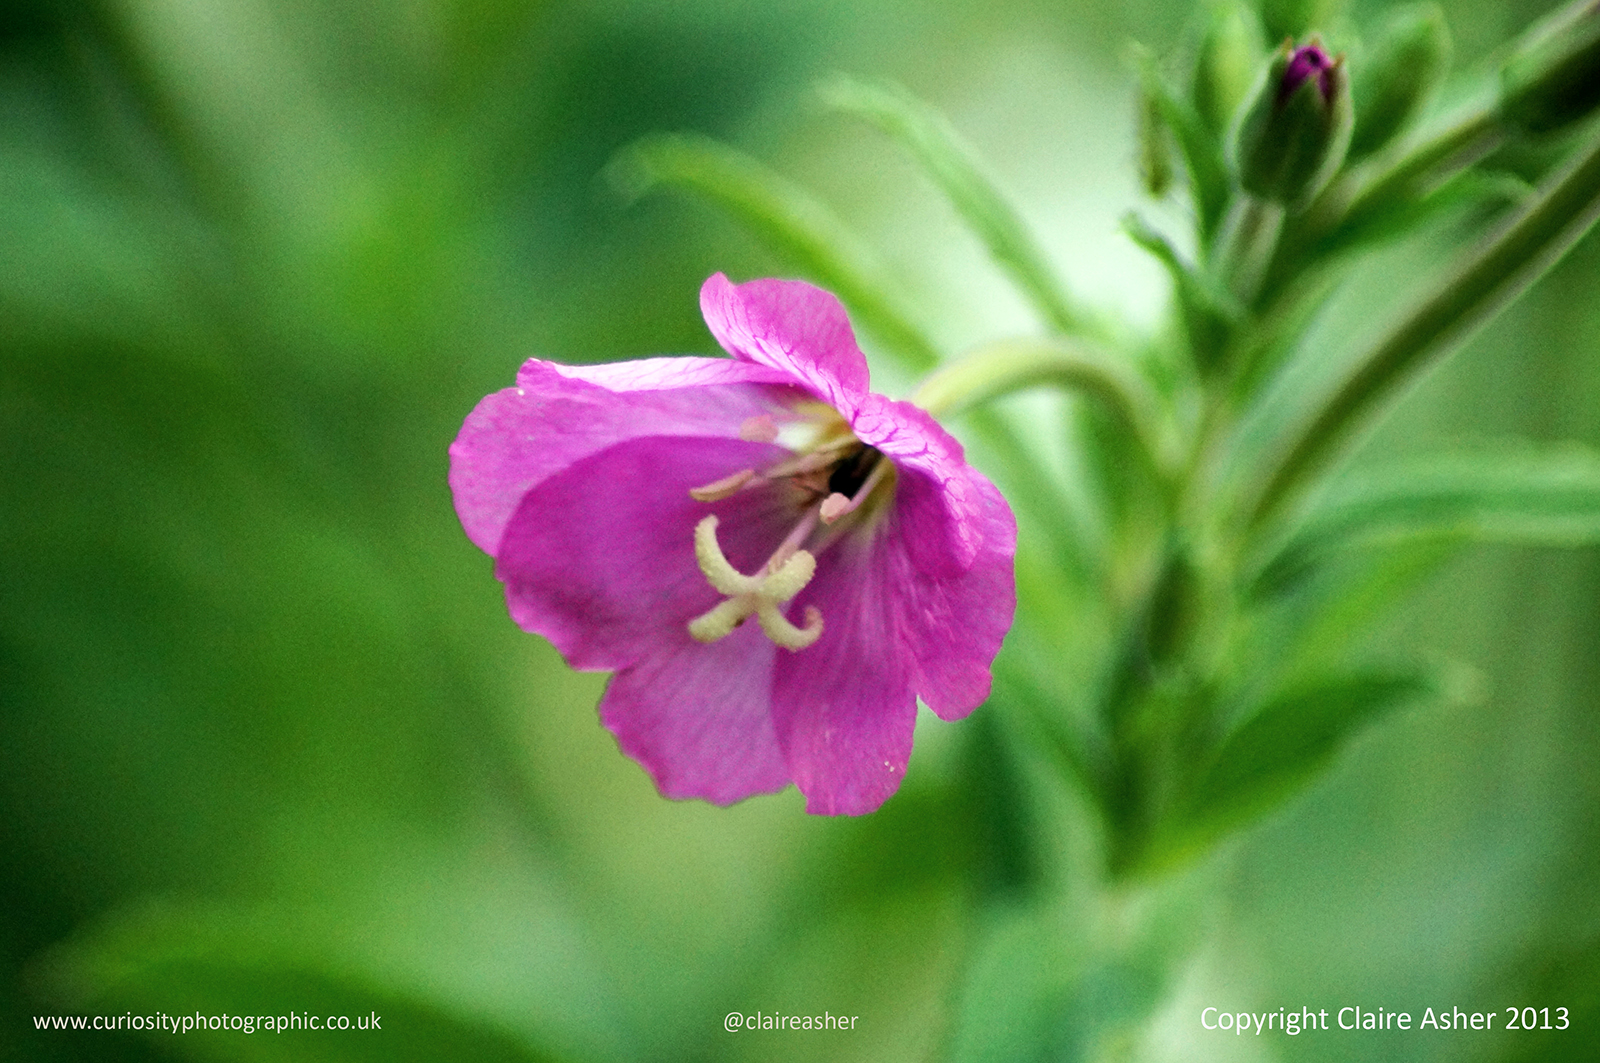 A pink flower photographed in Hertfordshire, England in 2013.